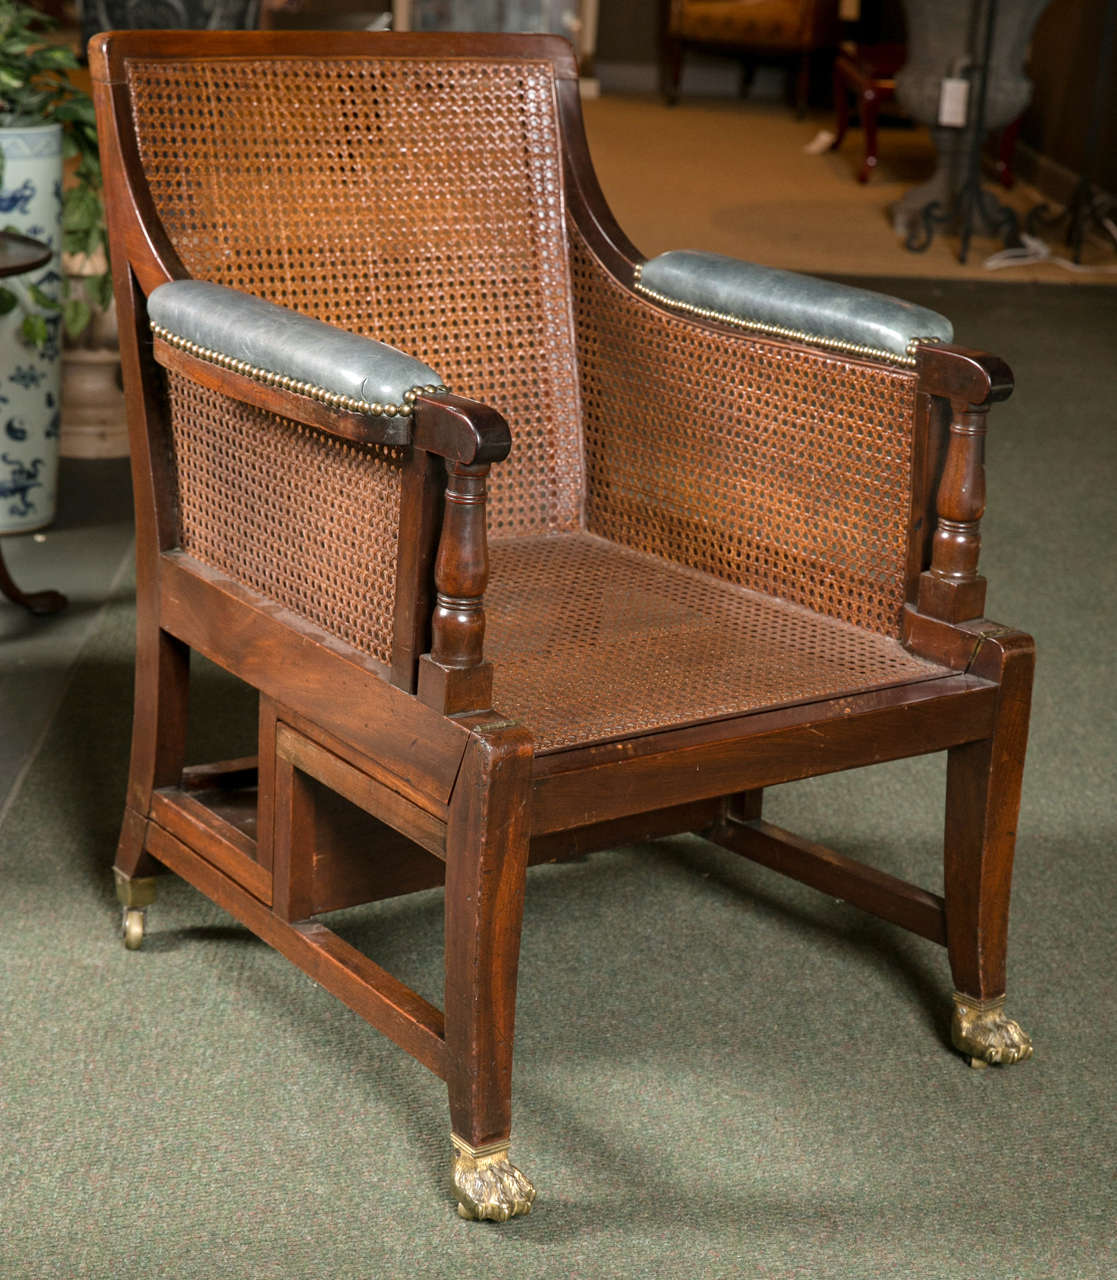 A 19th century Regency cane metamorphic library chair.